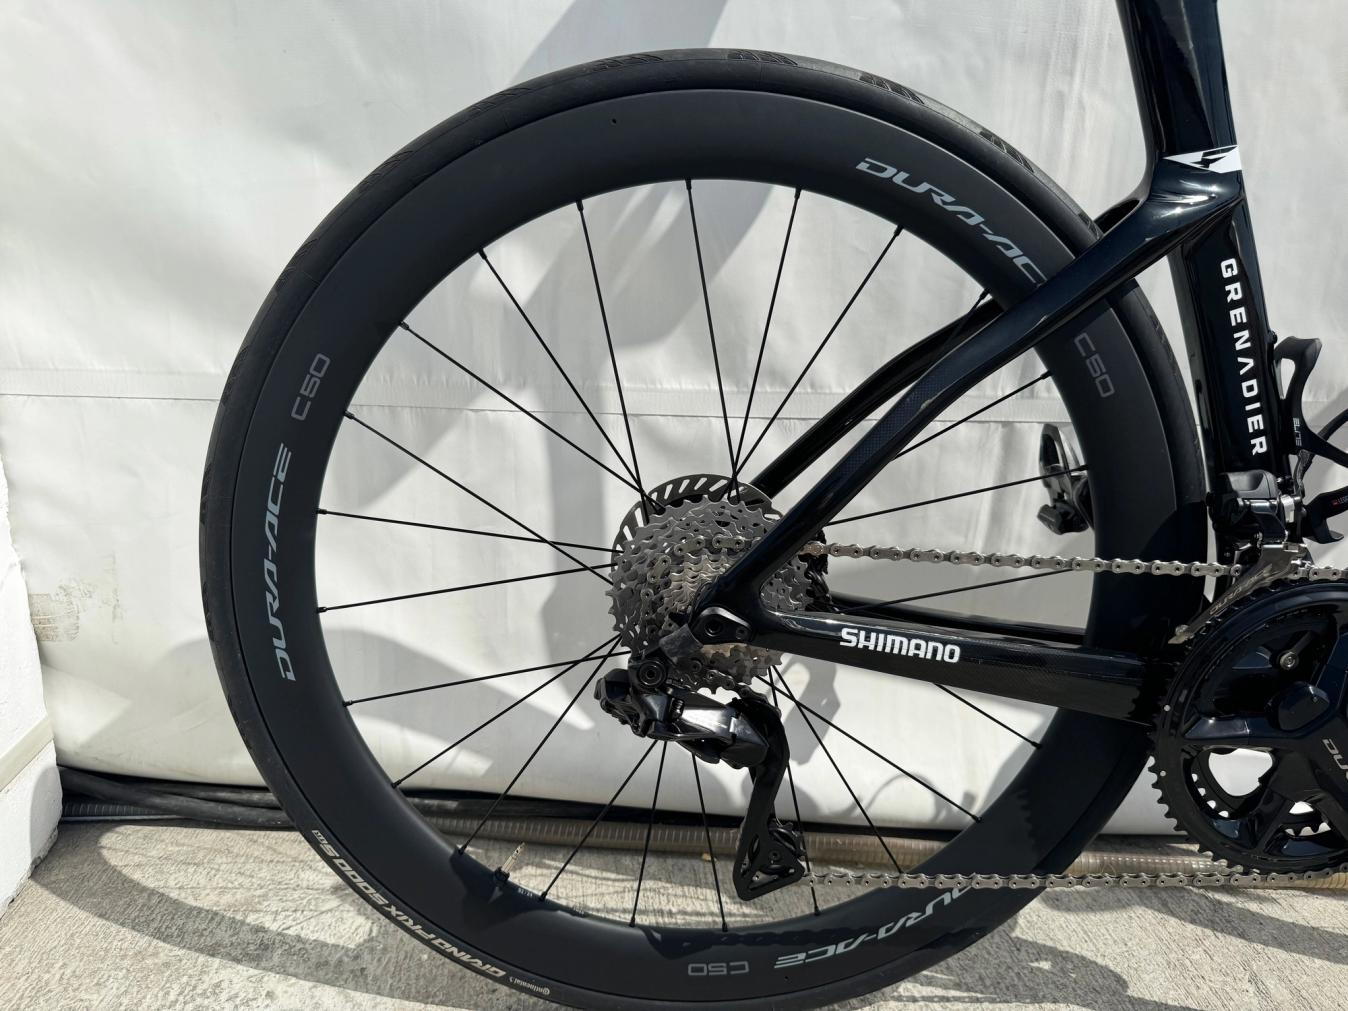 A combination of Shimano's Dura-Ace C50 wheels and Continental Grand Prix tyres